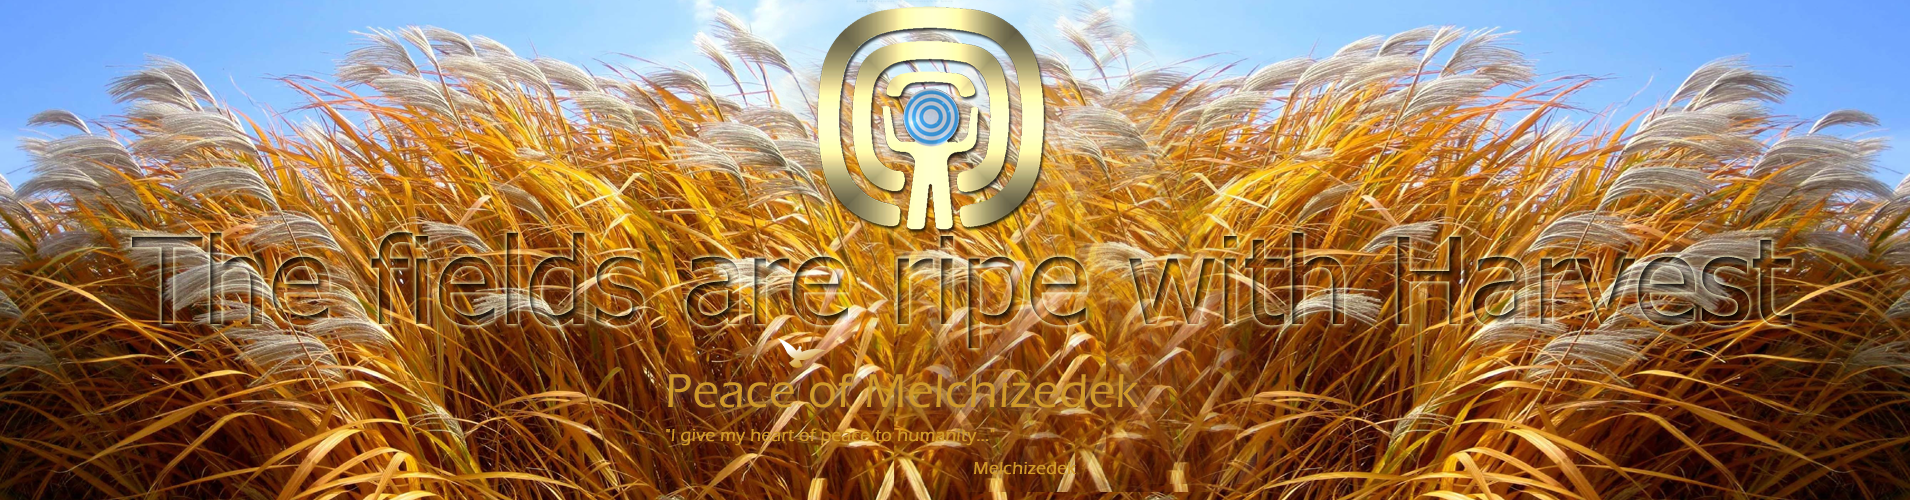 The Fields are ripe with Harvest. Click the image to join our Social Network at Spiritual Family Network.